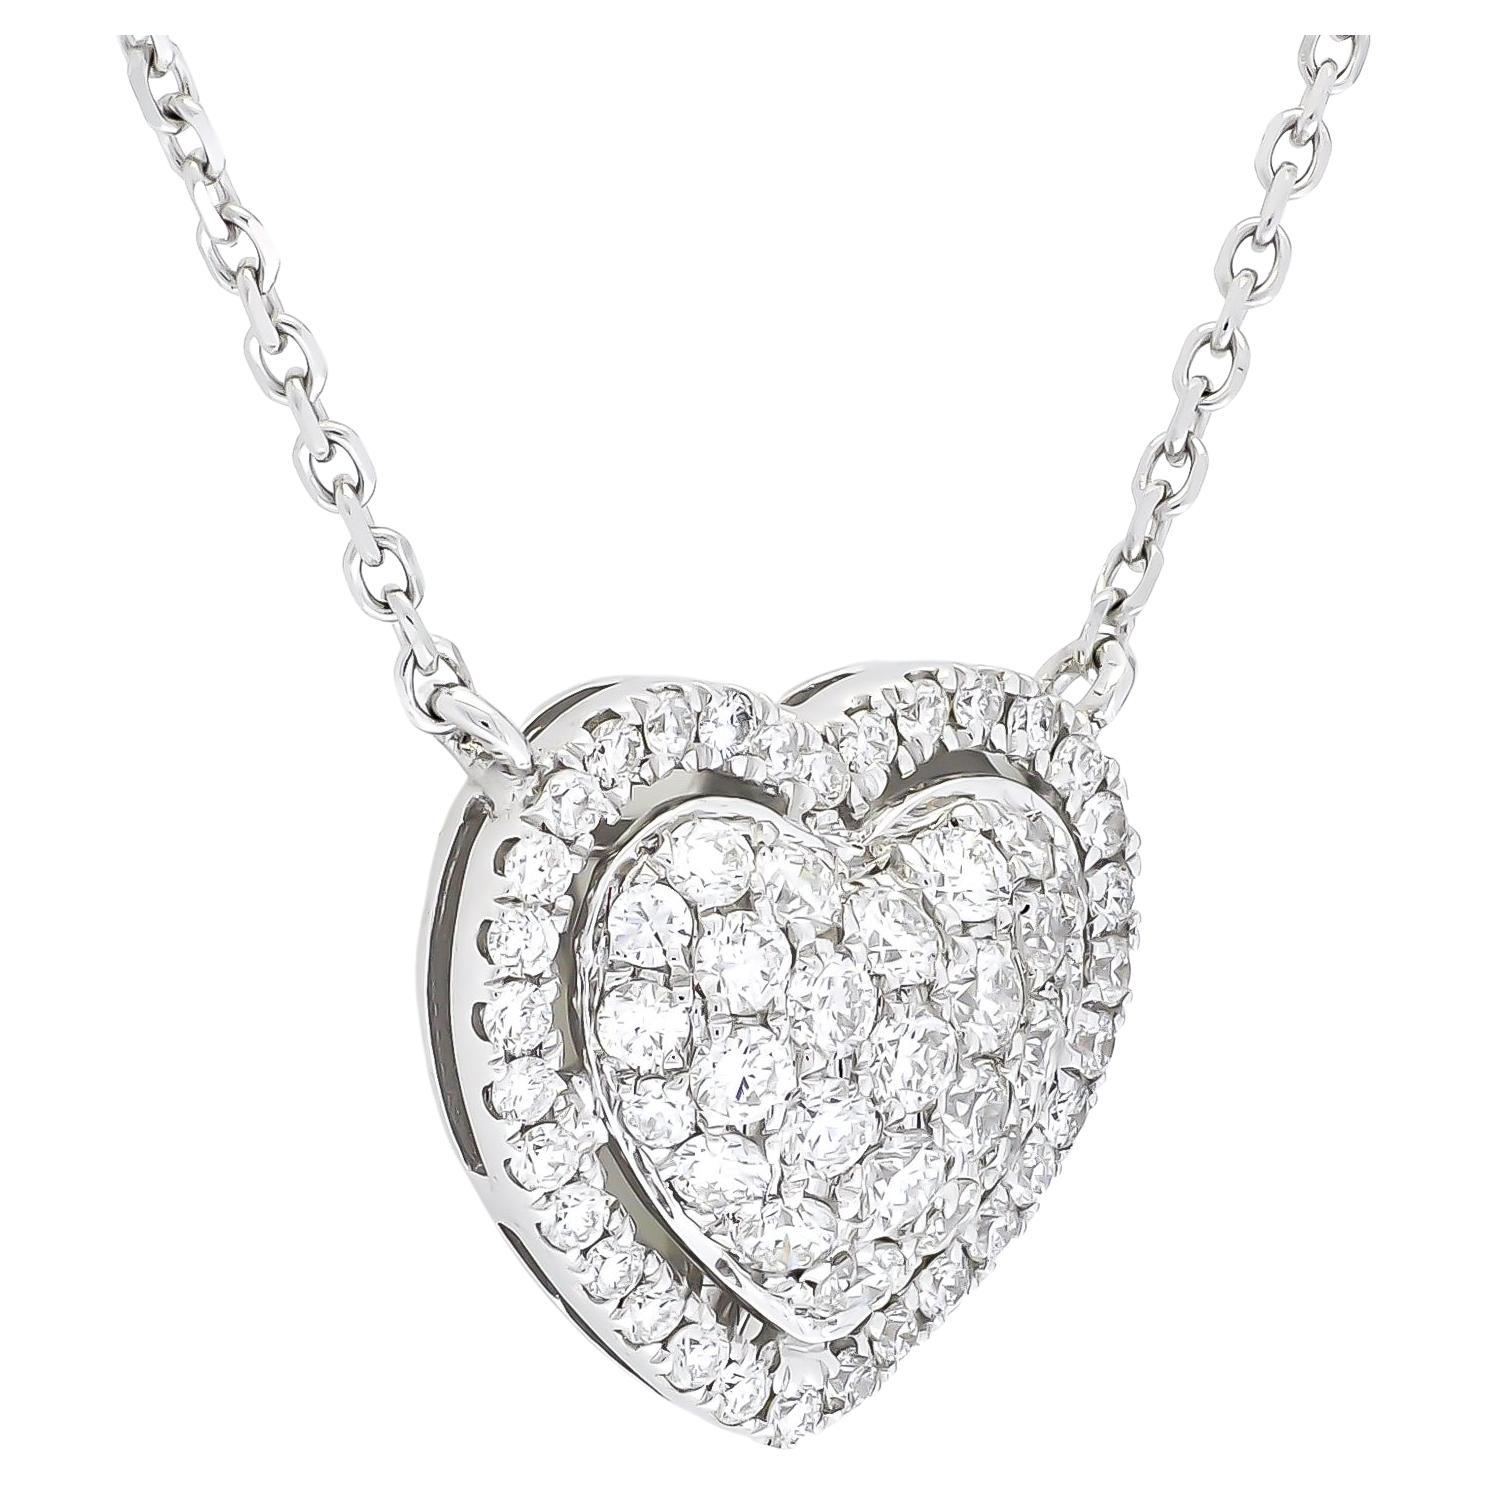 Embrace the brilliance of a true showstopper with this dazzling heart-shaped diamond cluster in a halo pendant necklace. The necklace boasts a sumptuous 0.55 carats of glittering diamonds, ensuring every glance in your direction is captivated by the